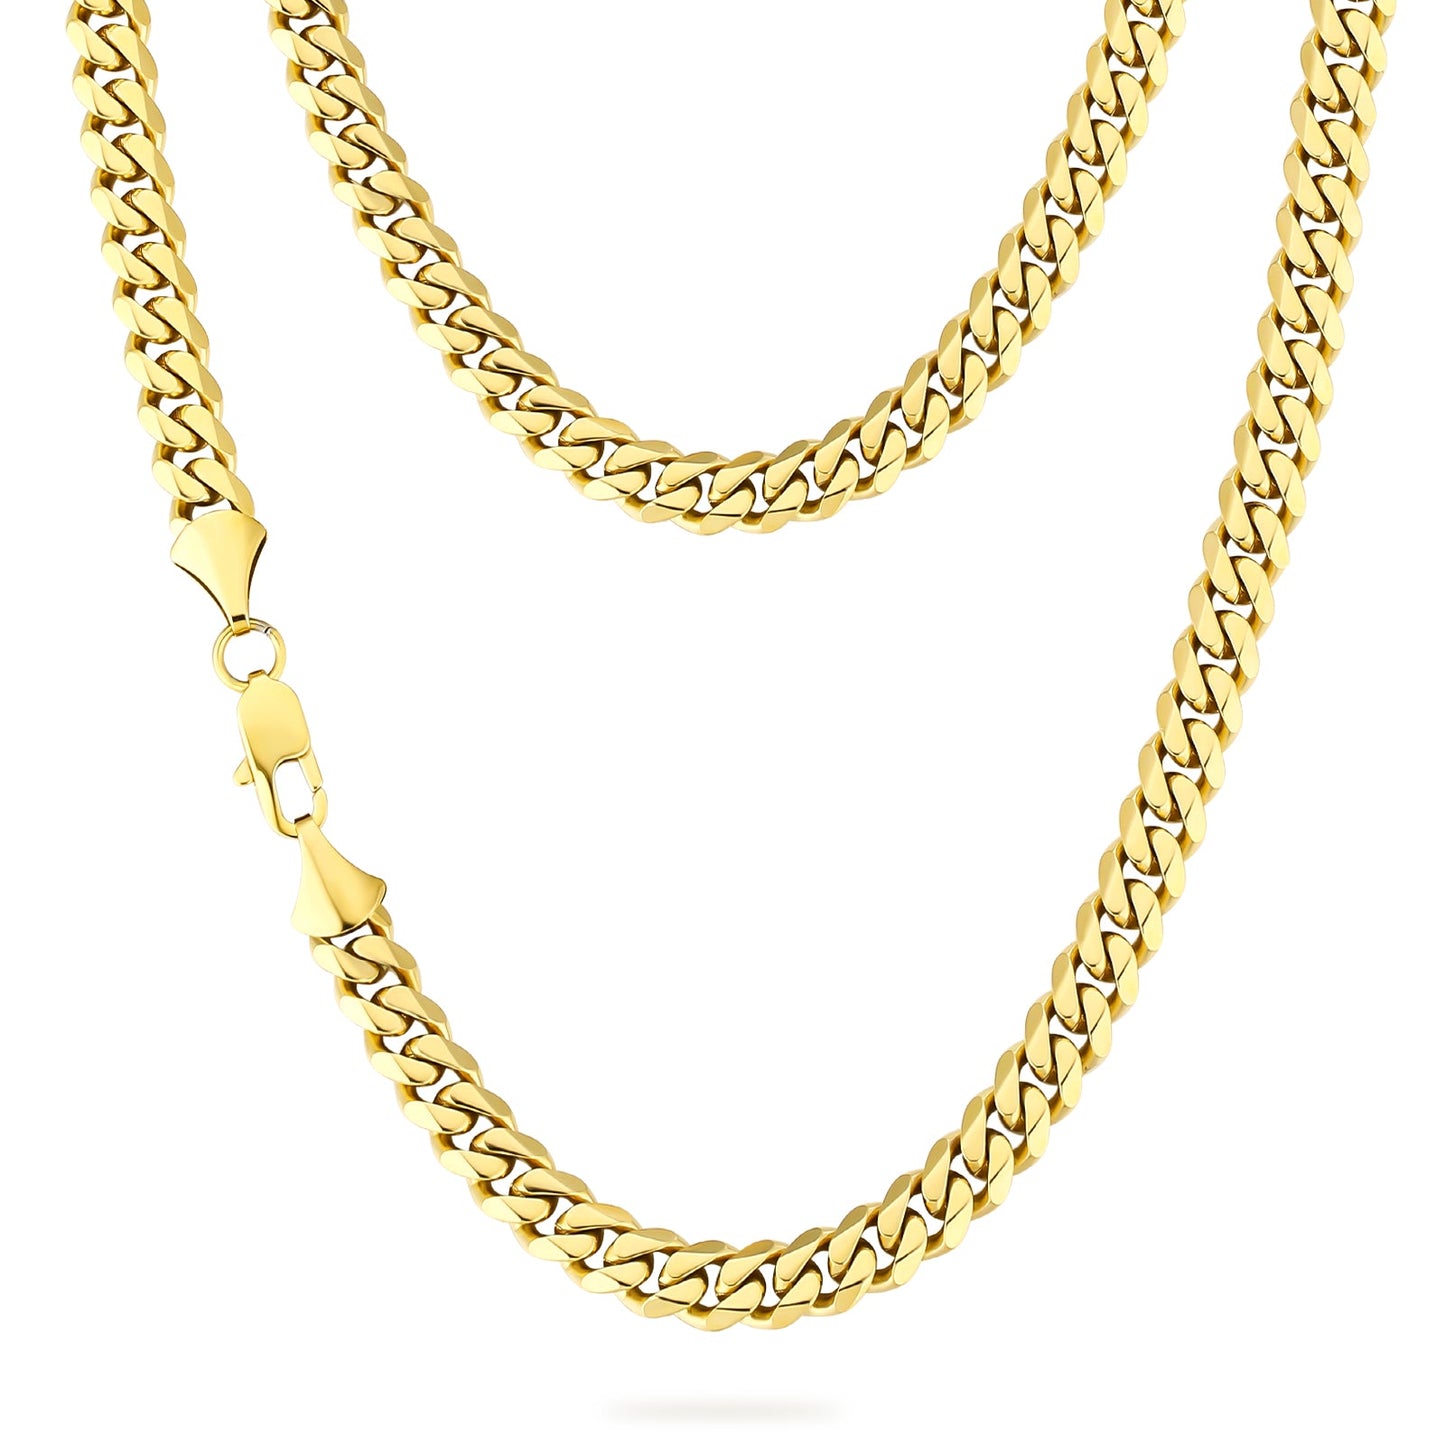 Scarabeaus 8mm 14K Gold/White Gold 6-sided Cuban Chain Cut